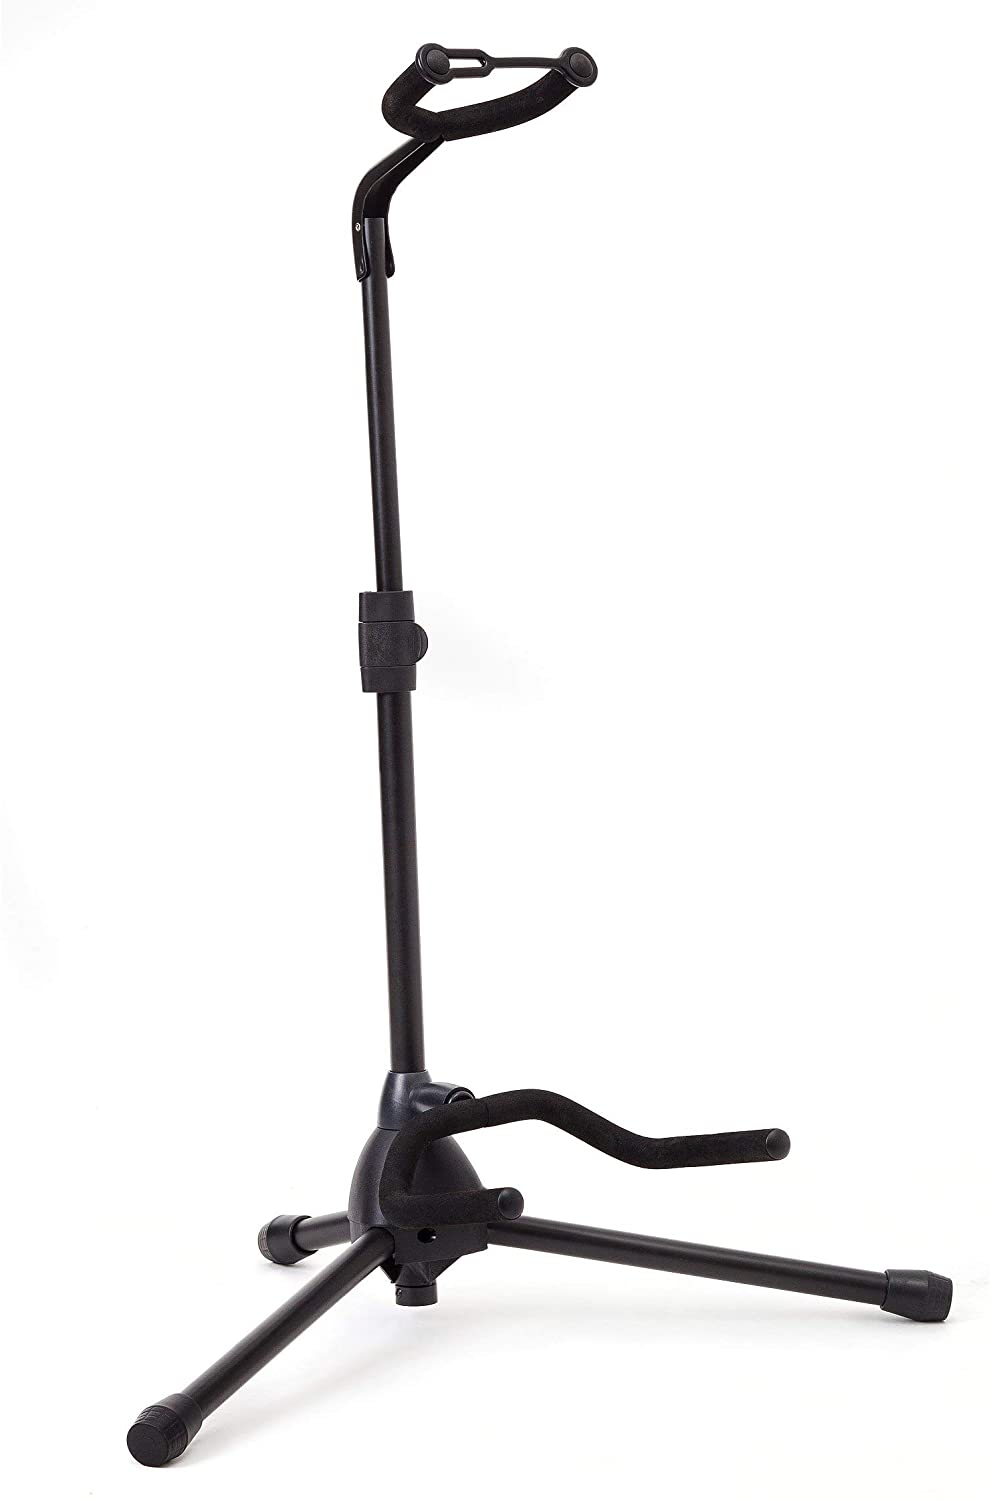 Universal guitar stand by Hola Music